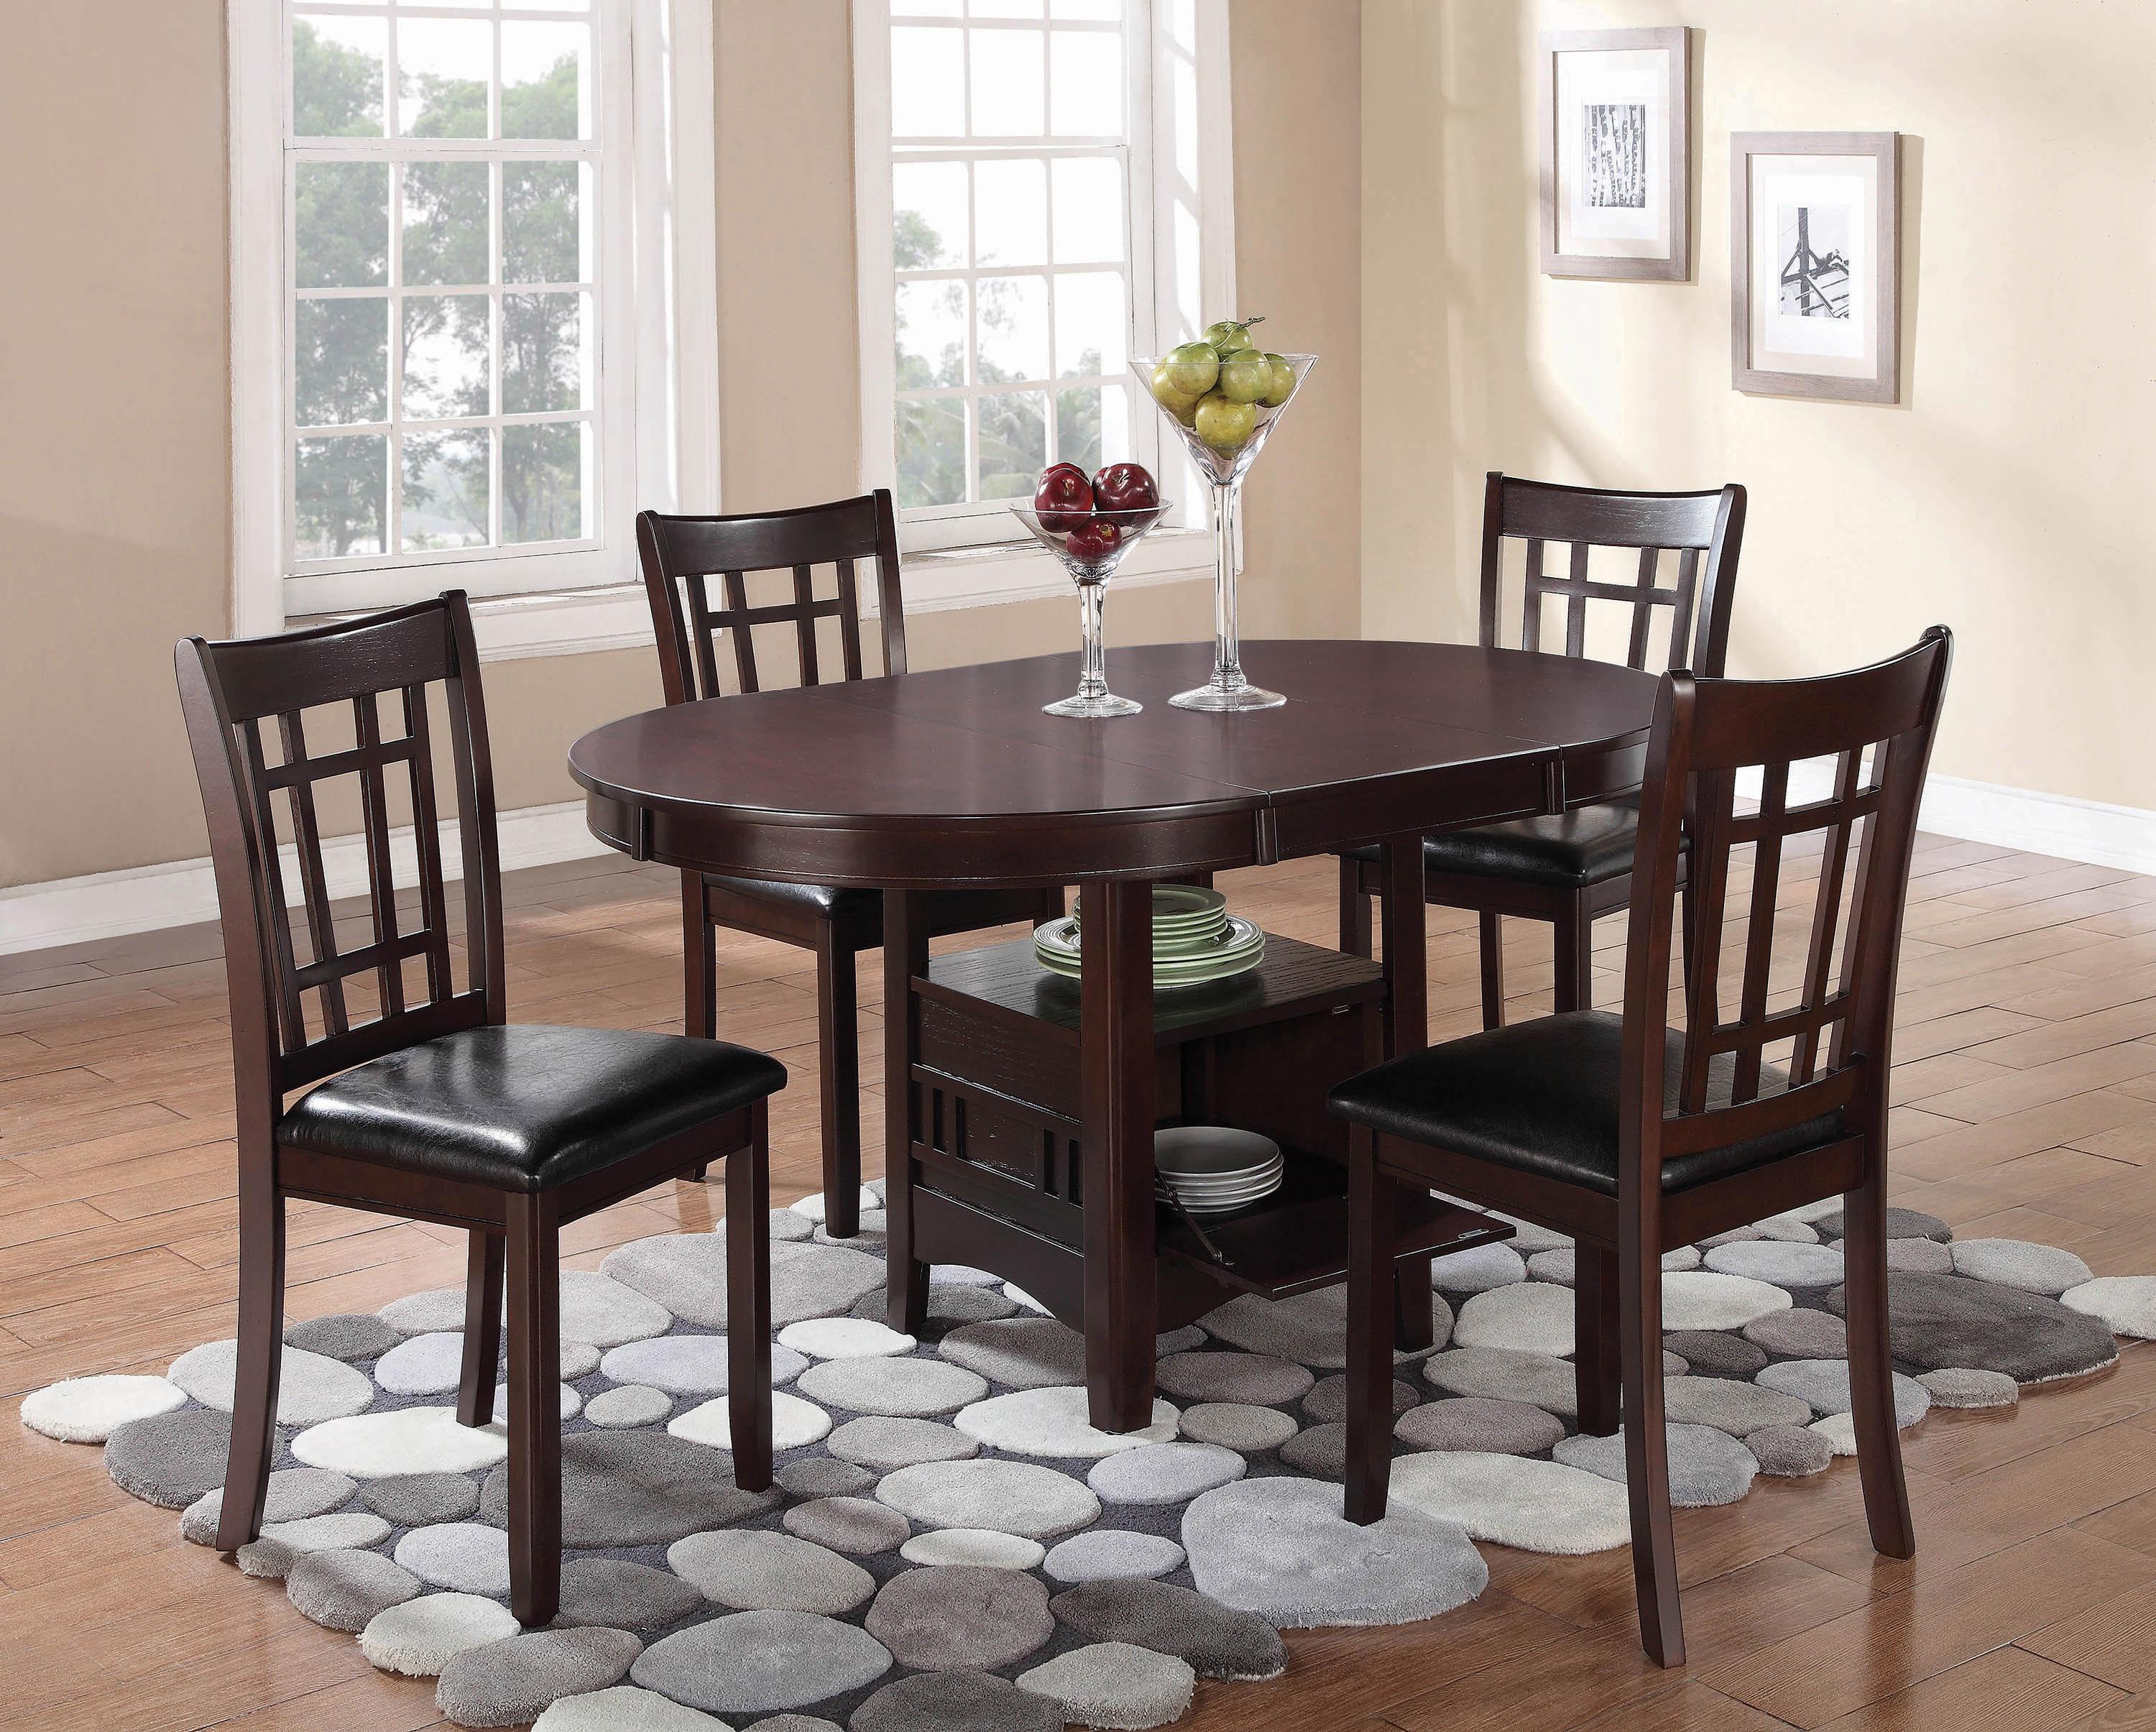 Transitional Dining Room Set 102671-S5 Lavon 102671-S5 in Espresso 